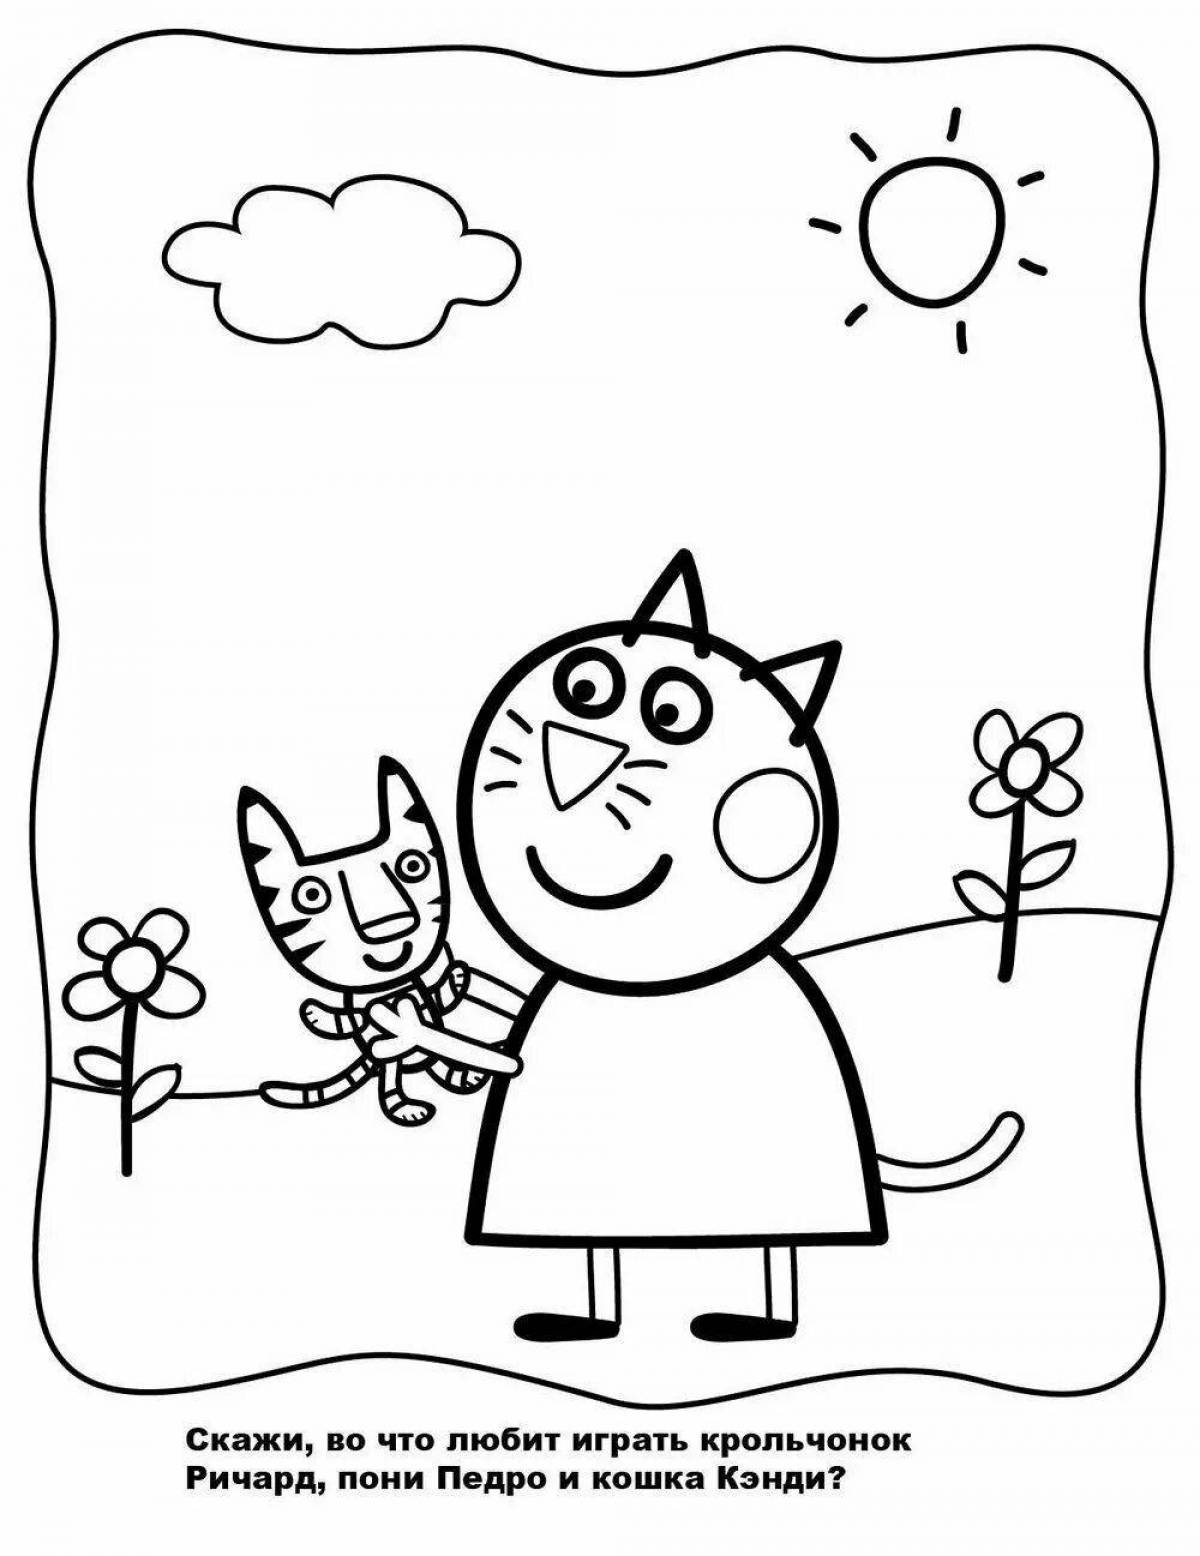 Coloring page funny candy cat